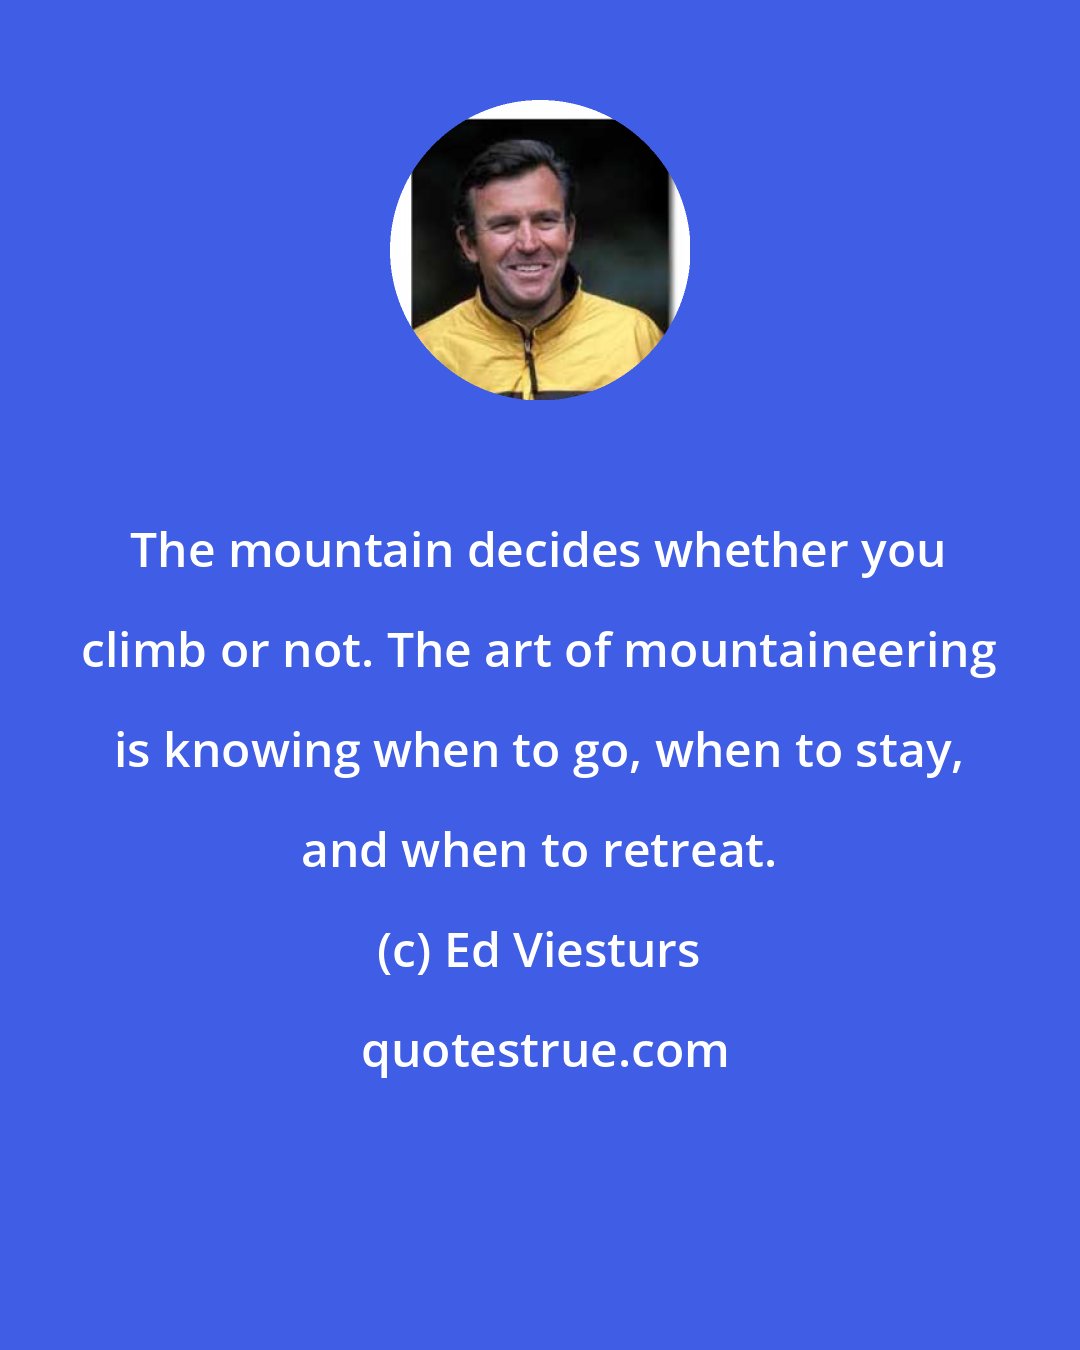 Ed Viesturs: The mountain decides whether you climb or not. The art of mountaineering is knowing when to go, when to stay, and when to retreat.